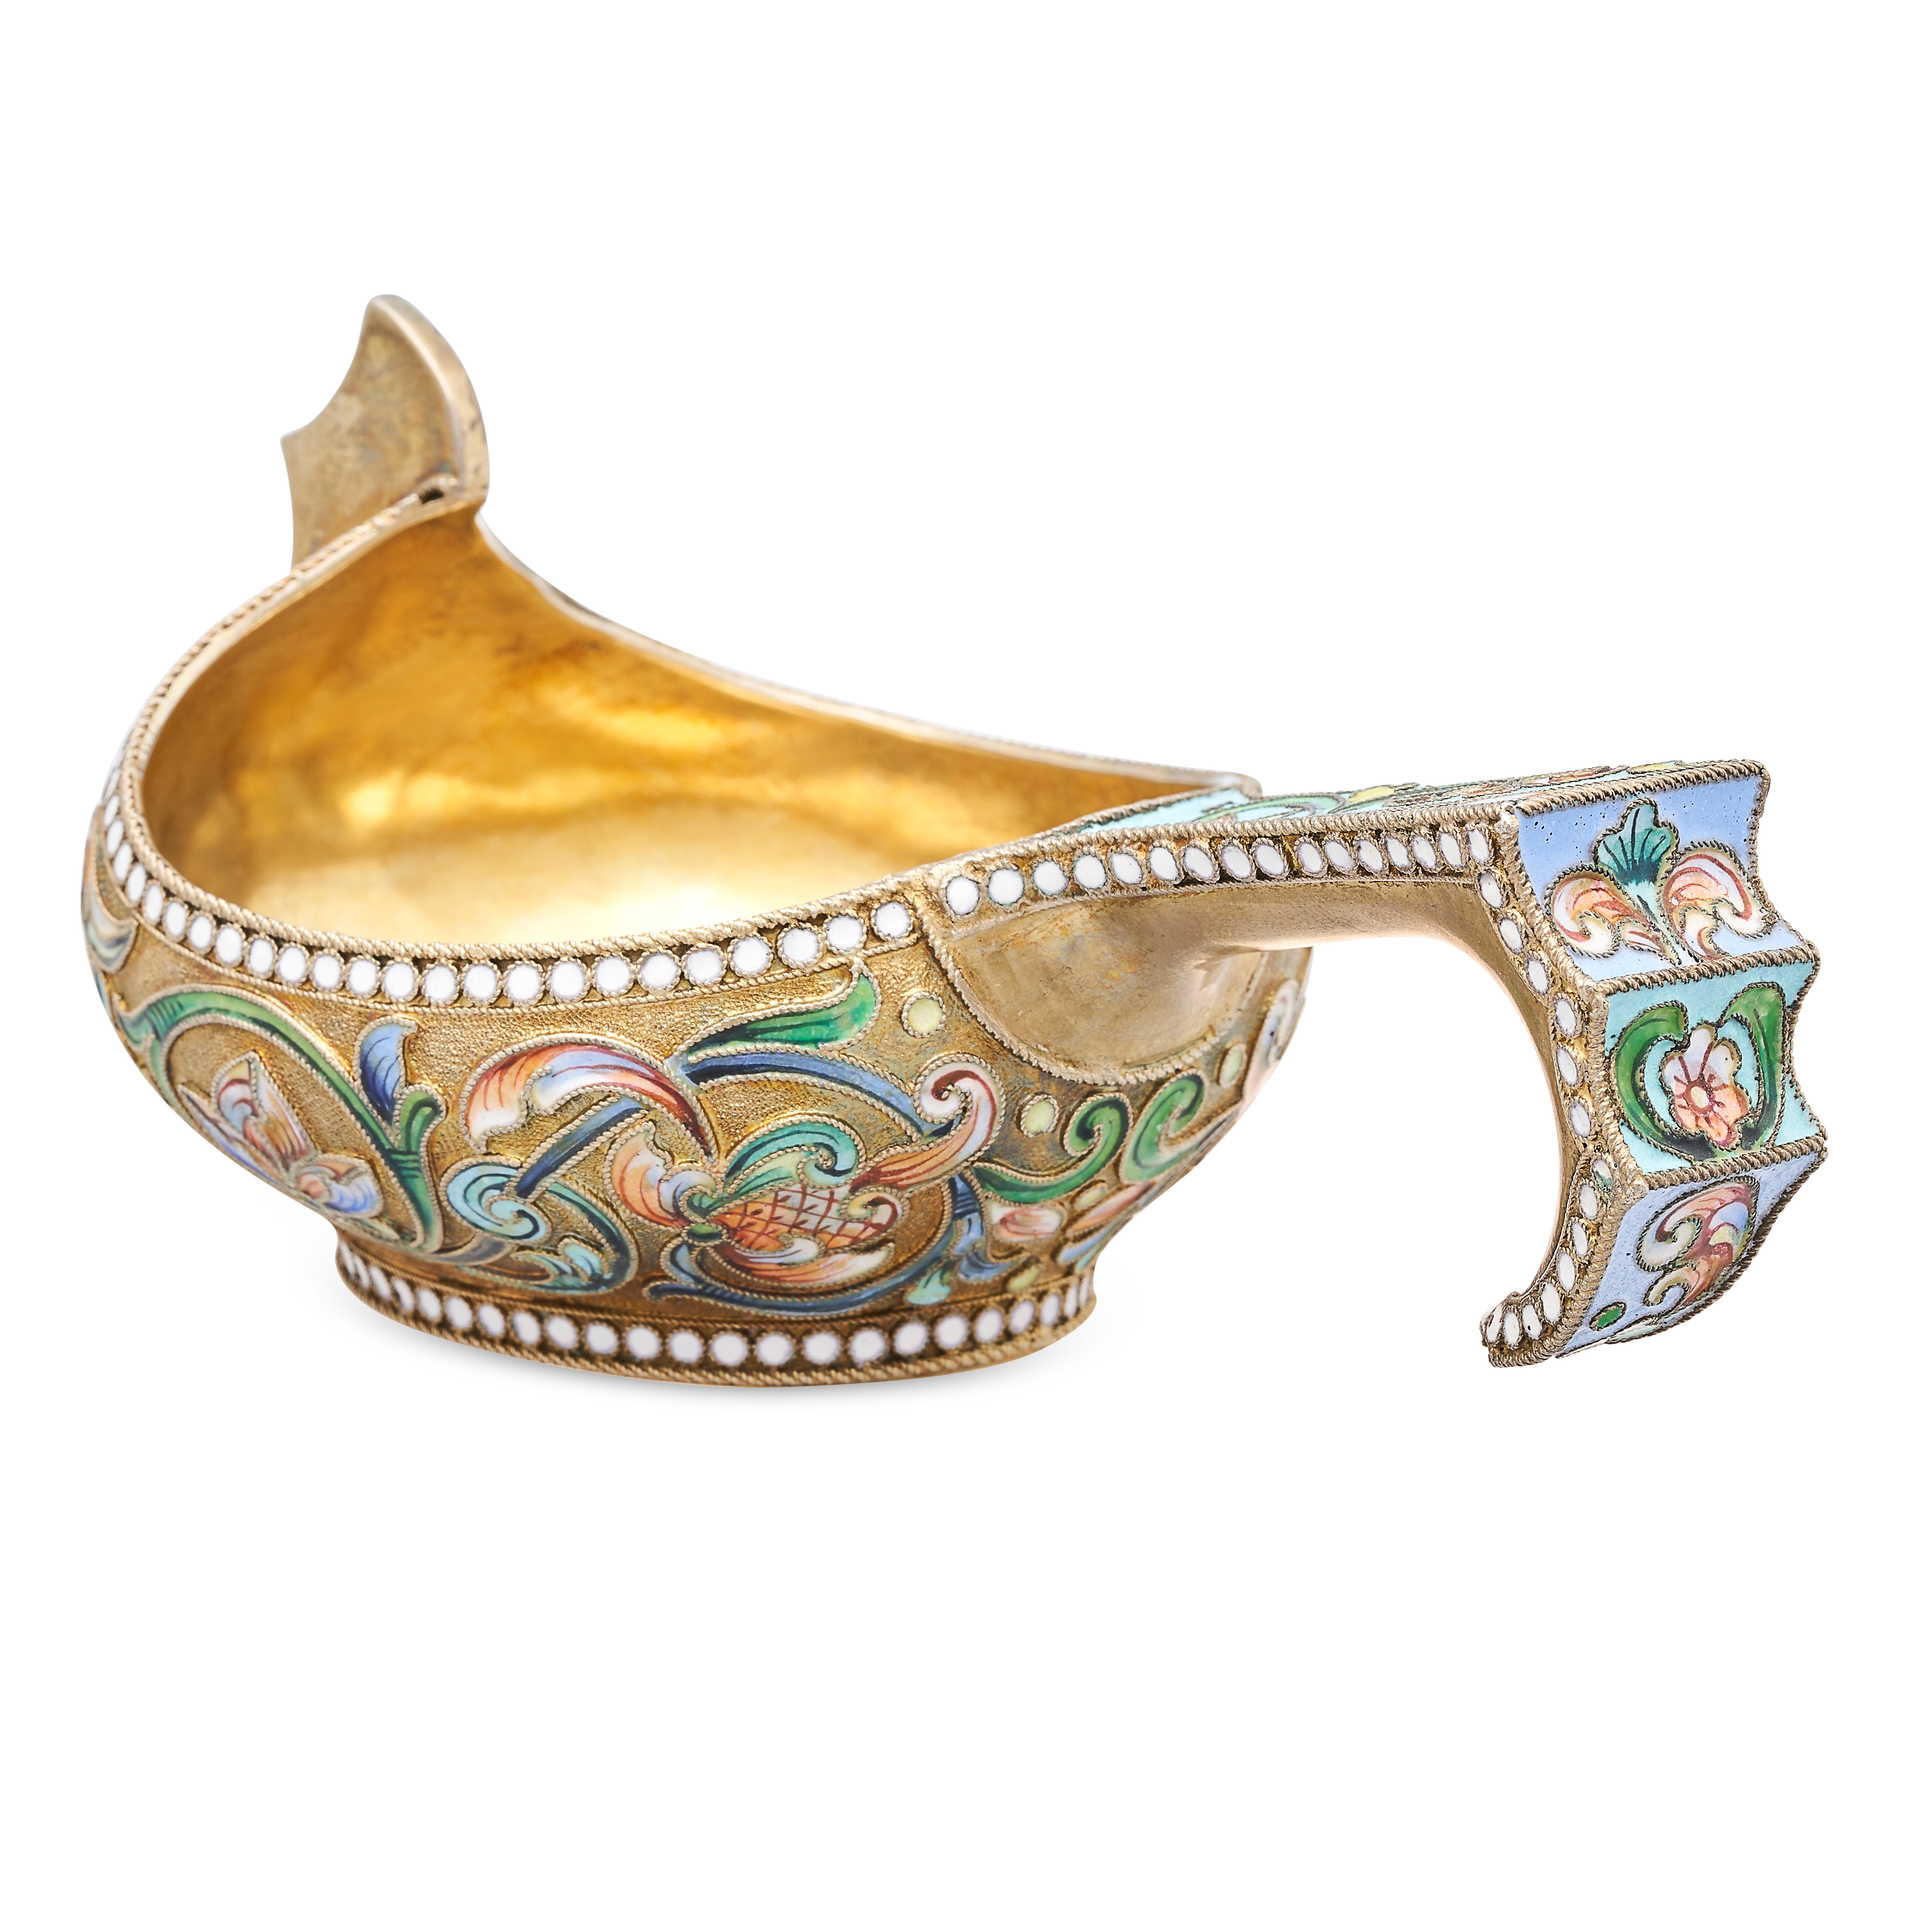 AN ANTIQUE IMPERIAL RUSSIAN SILVER ENAMEL KOVSH, VASILY AGAFONOV, MOSCOW 1908-1917 in 84 zolotnik - Image 2 of 3